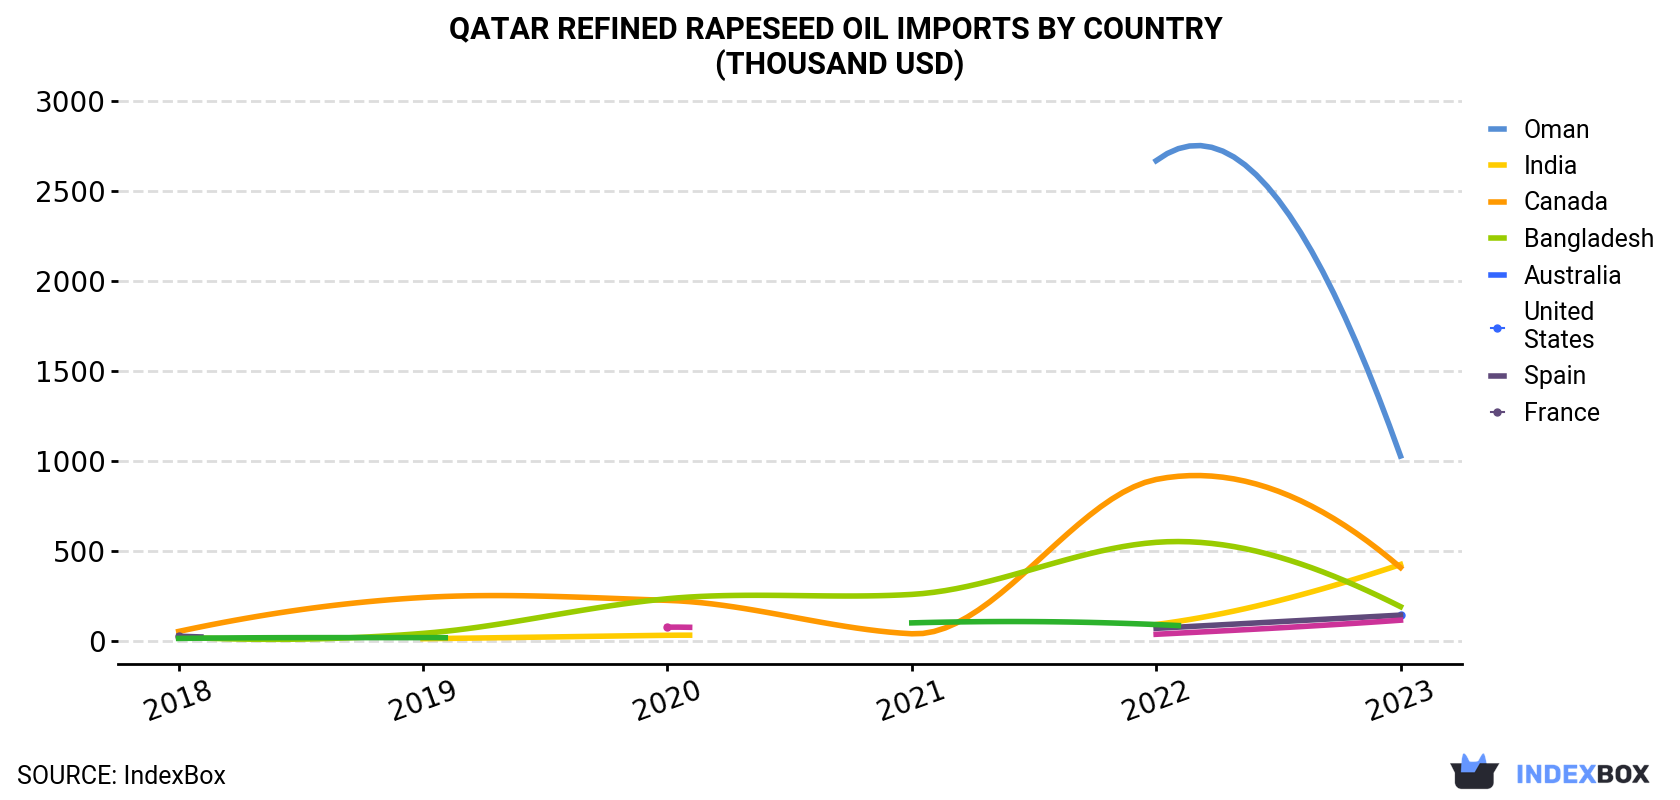 Qatar Refined Rapeseed Oil Imports By Country (Thousand USD)